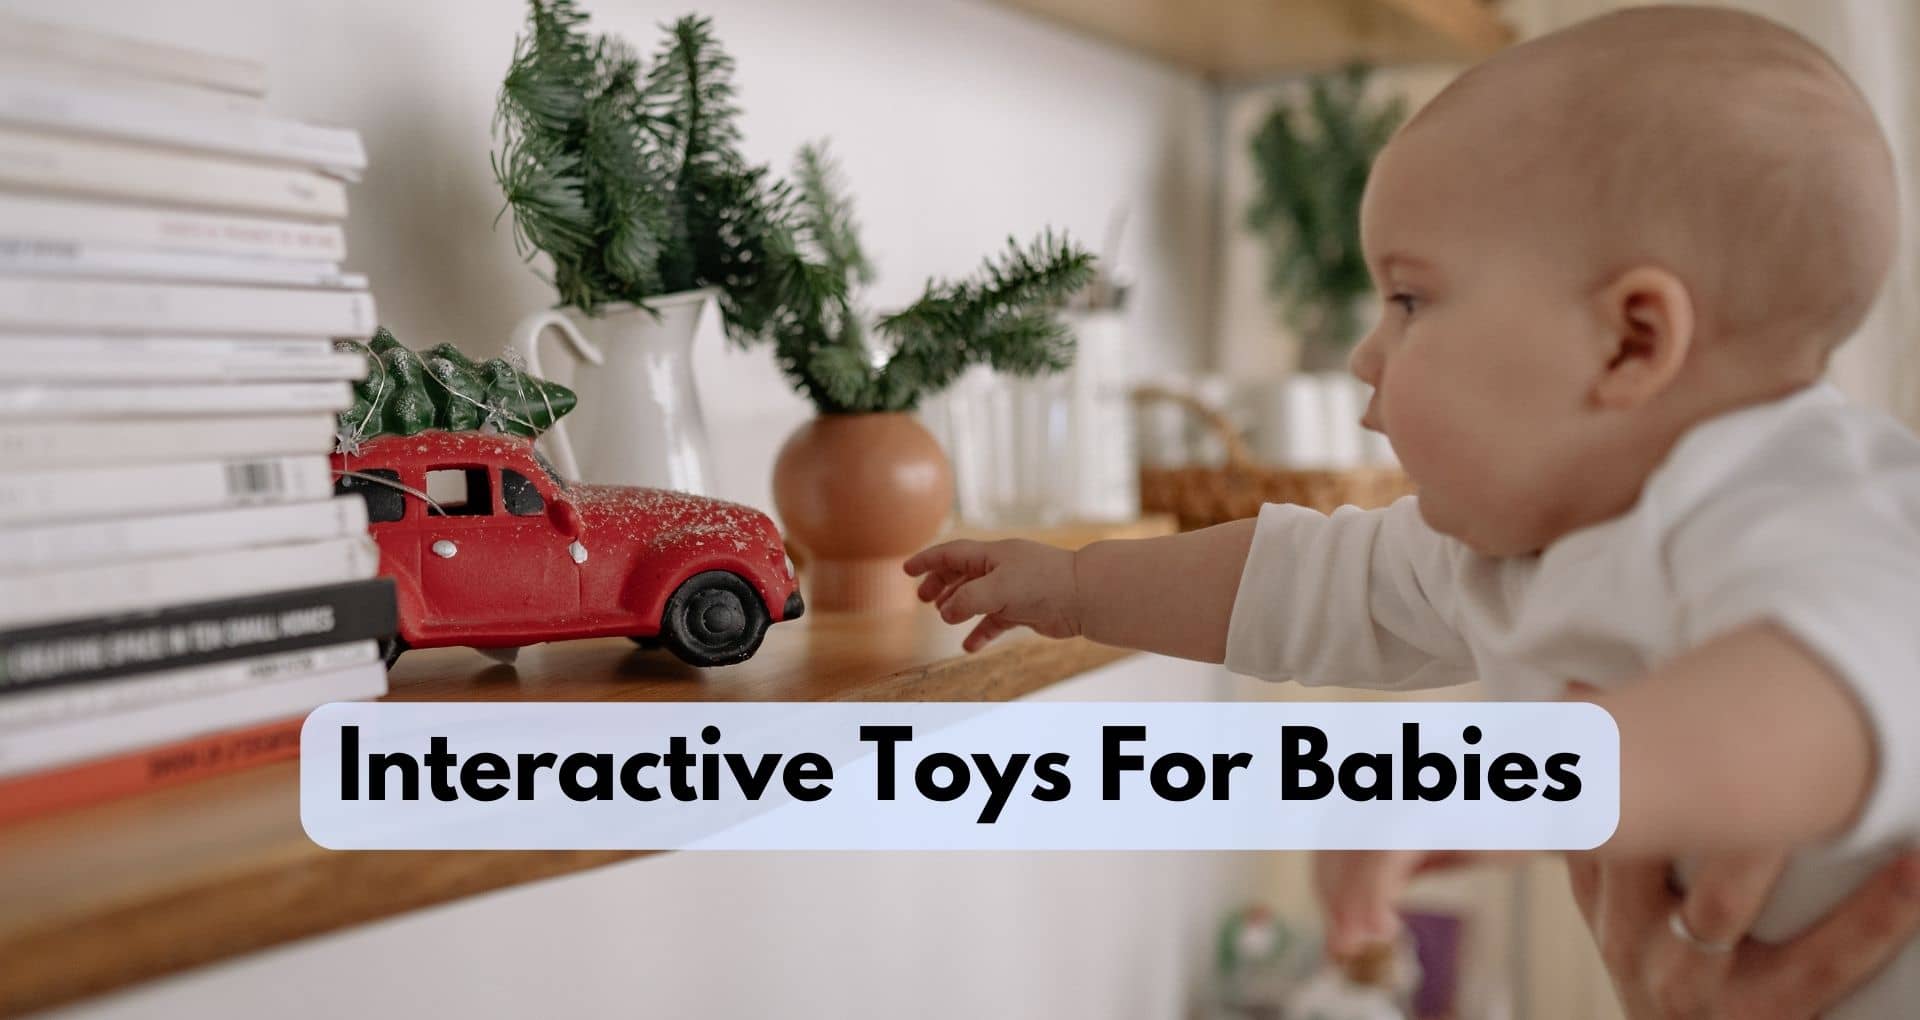 What Are Some Interactive Toys For Babies?